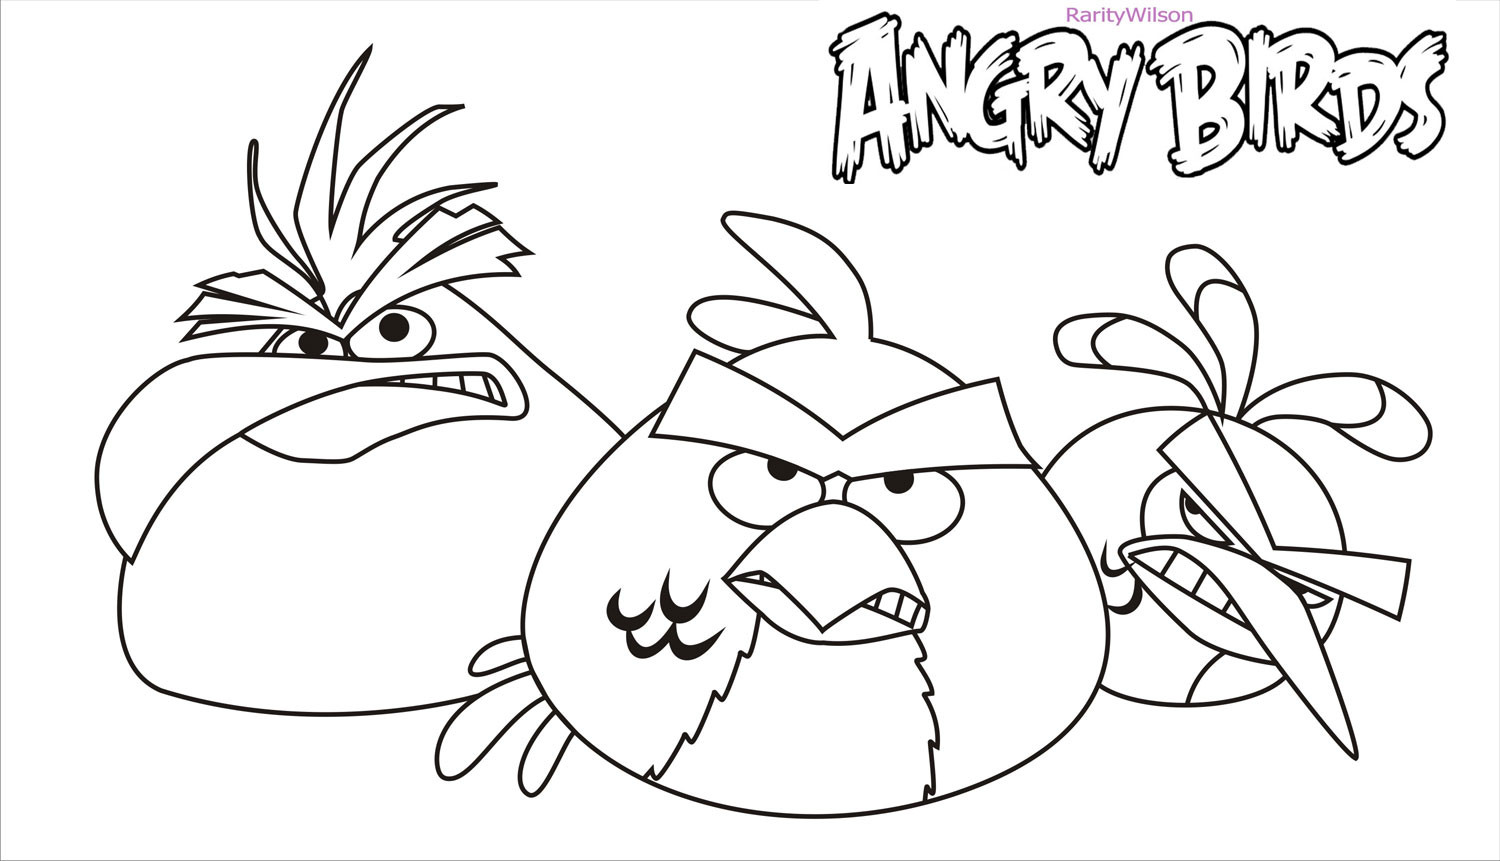 Angry Bird Printable Coloring Pages
 Angry Birds Rio Coloring Pages